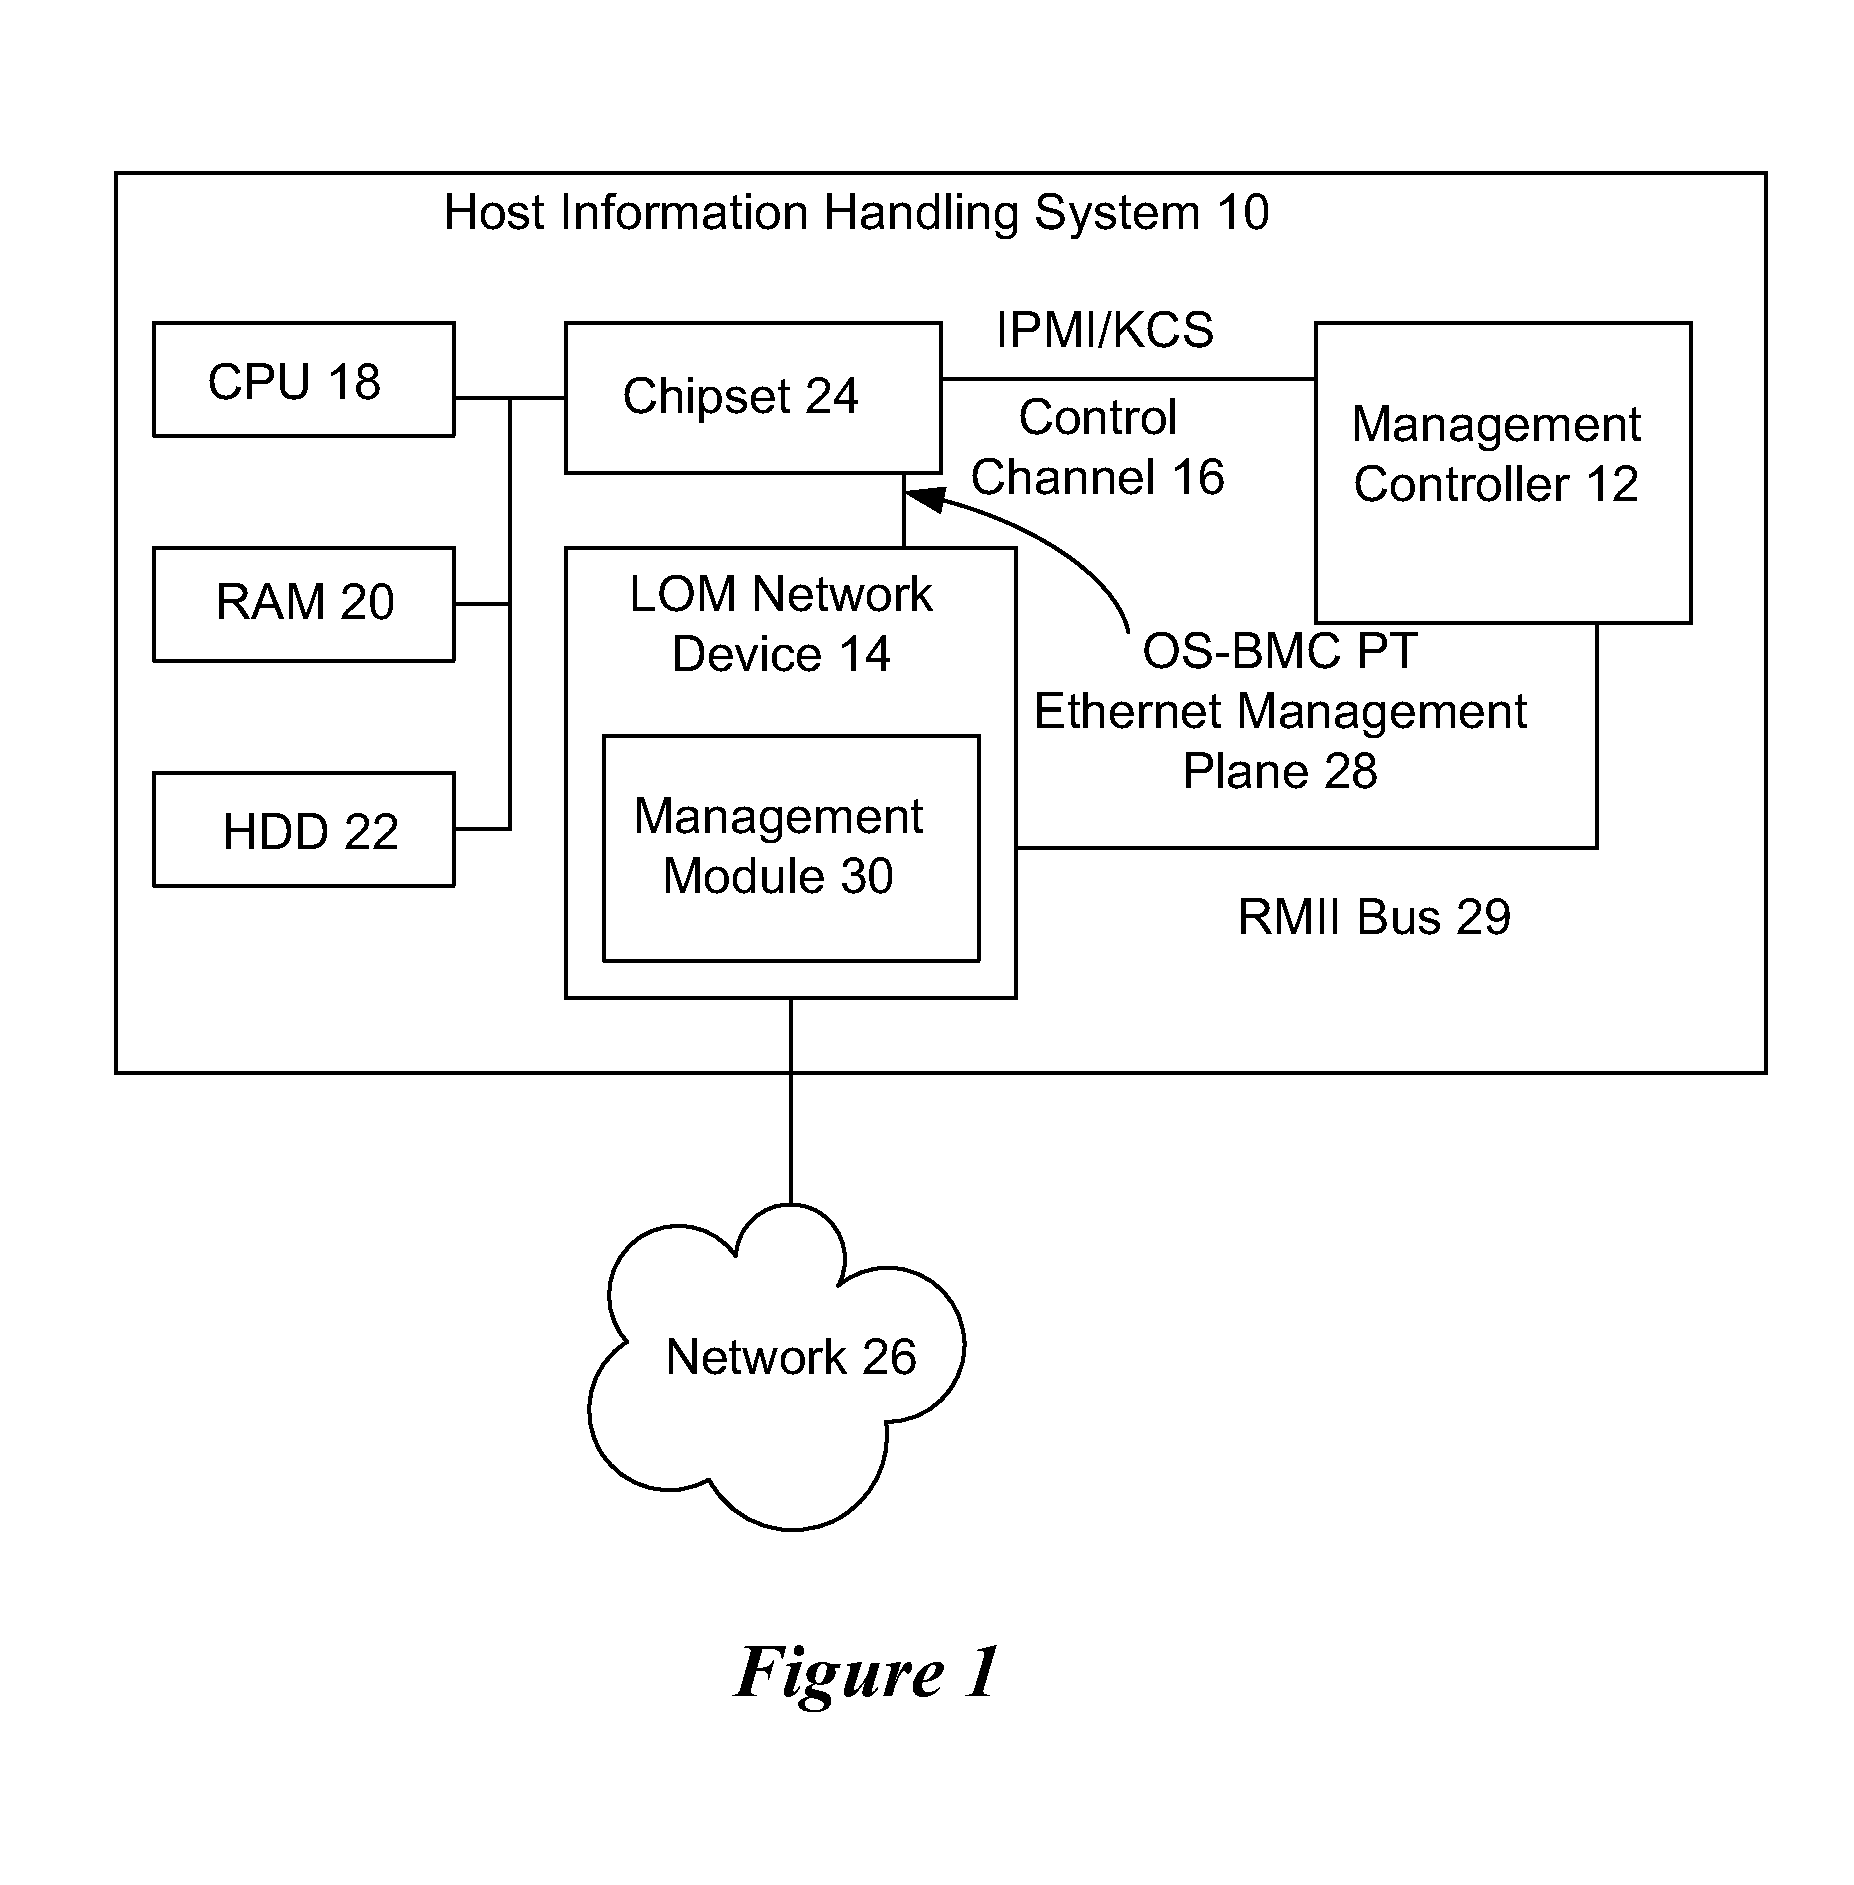 System and Method for Communication Between an Information Handling System and Management Controller Through a Shared LOM